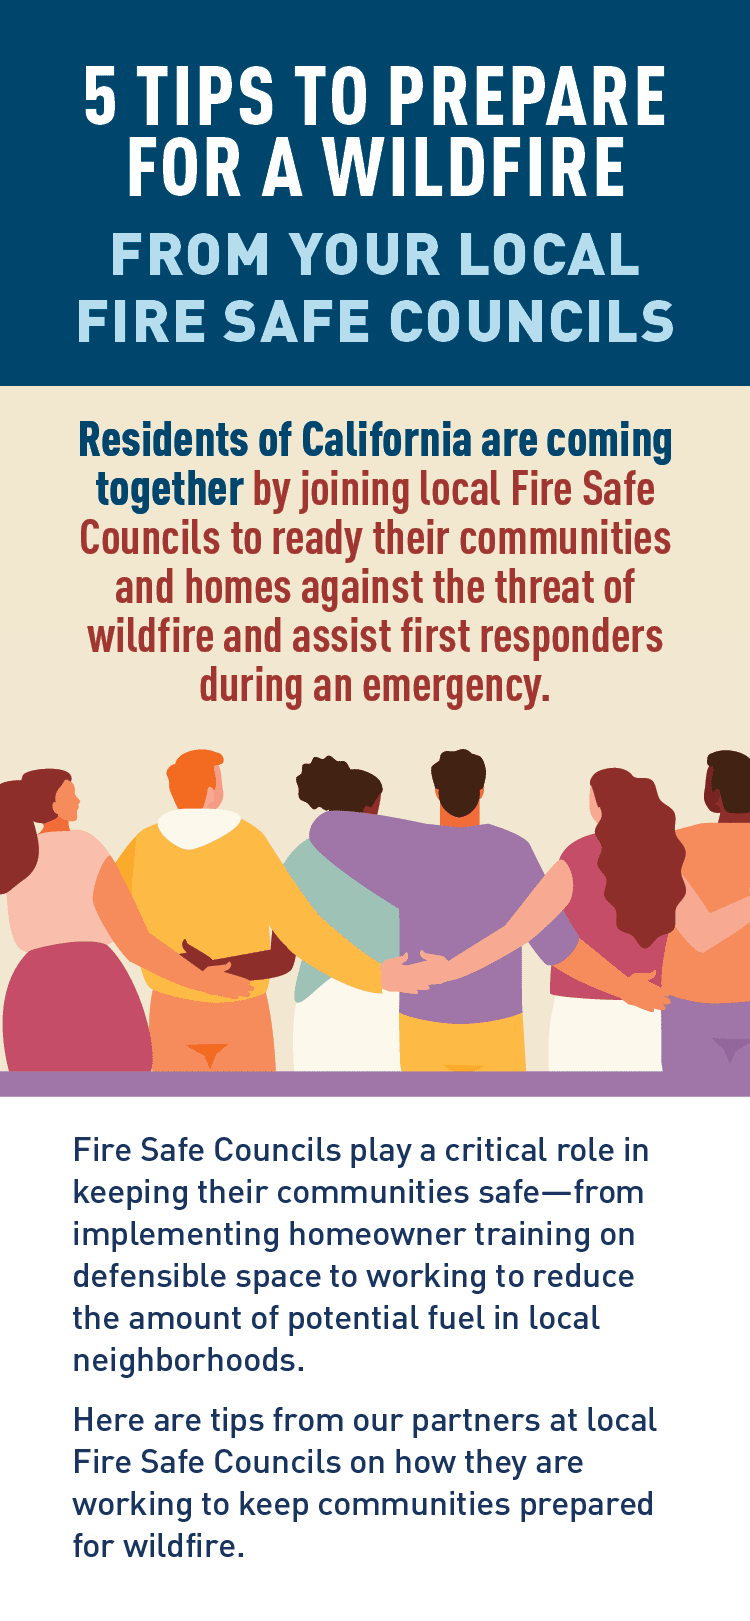 Graphic: People joined together. Description: 5 TIPS TO PREPARE FOR A WILDFIRE FROM YOUR LOCAL FIRE SAFE COUNCILS  Residents of California are coming together by joining local Fire Safe Councils to ready their communities and homes against the threat of wildfire and assist first responders during an emergency   Fire Safe Councils play a critical role in keeping their communities safe-from implementing homeowner training on defensible space to working to reduce the amount of potential fuel in local neighborhoods.  Here are tips from our partners at local Fire Safe Councils on how they are working to keep communities prepared for wildfire.